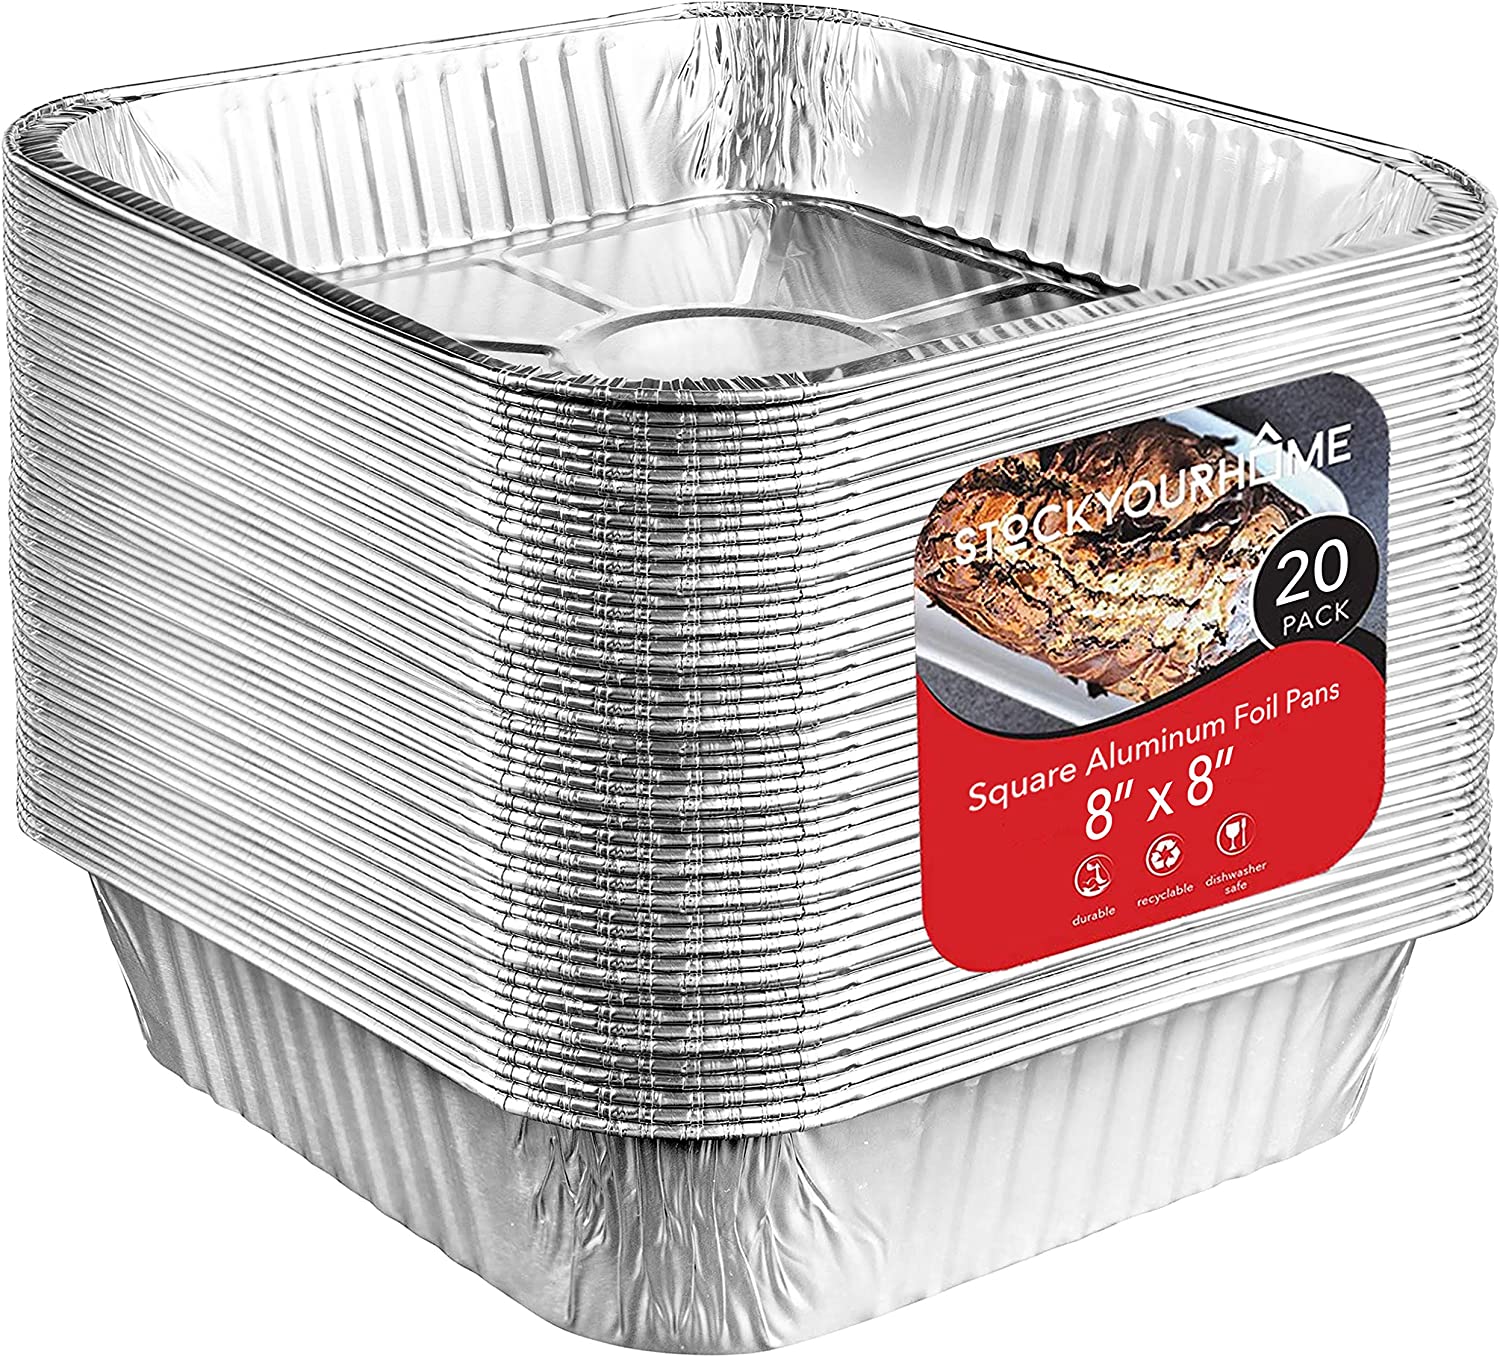 8x8 Foil Pans (20 Pack) 8 Inch Square Aluminum Pans - Foil Pans - Disposable Food Containers Great for Baking Cake, Cooking, Heating, Storing, Prepping Food